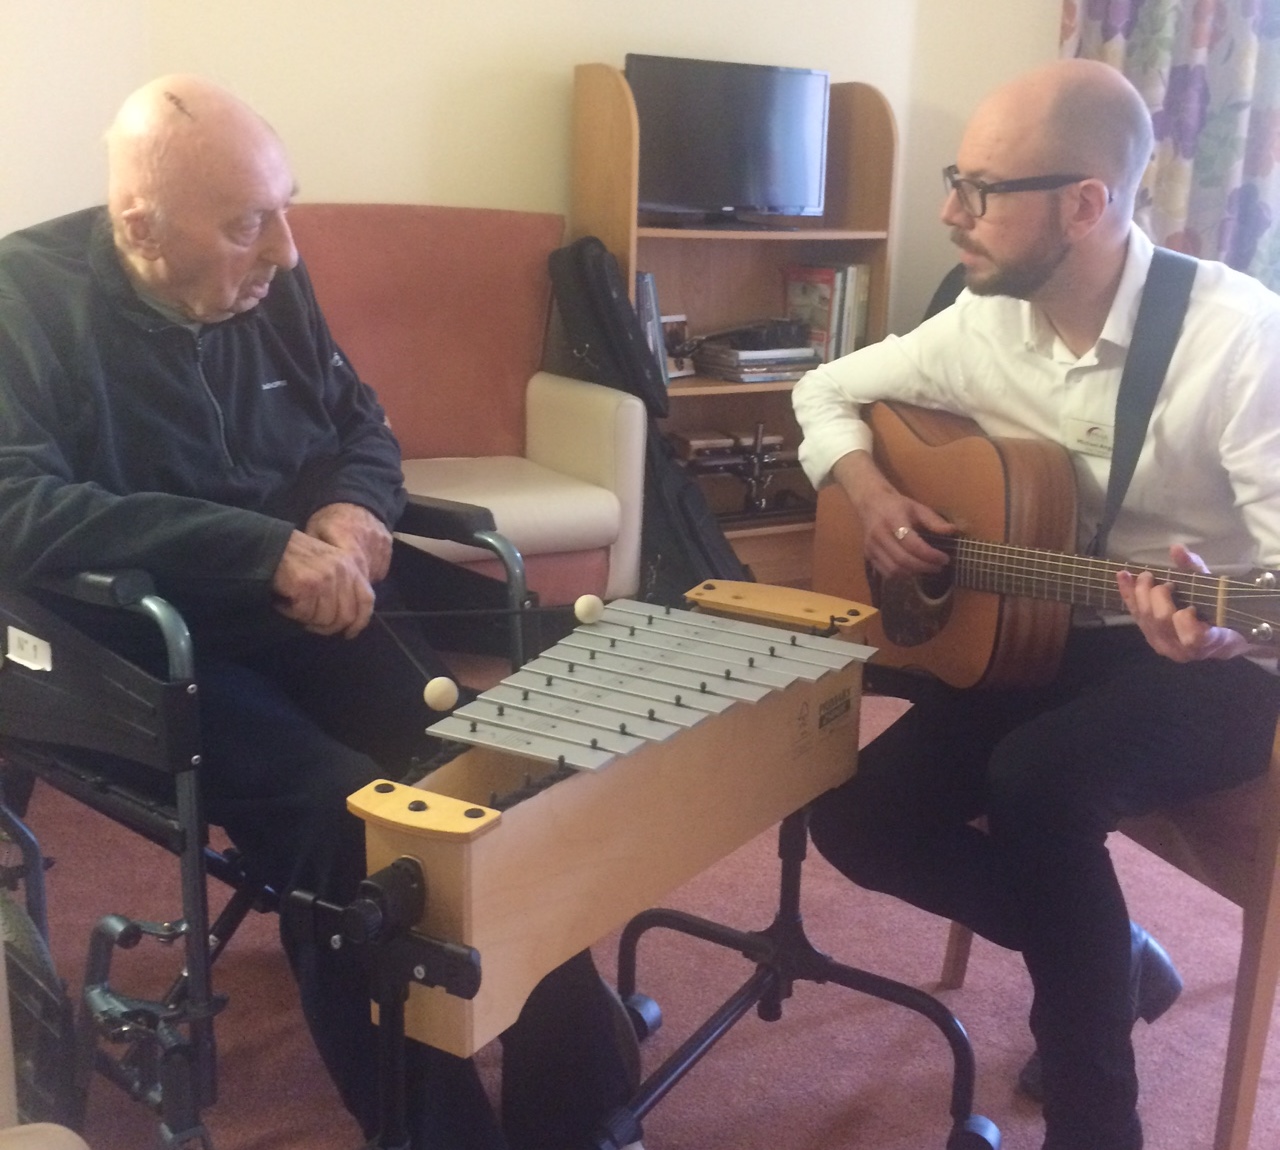 Torrwood resident Paul Mosby and music therapist Michael Angus